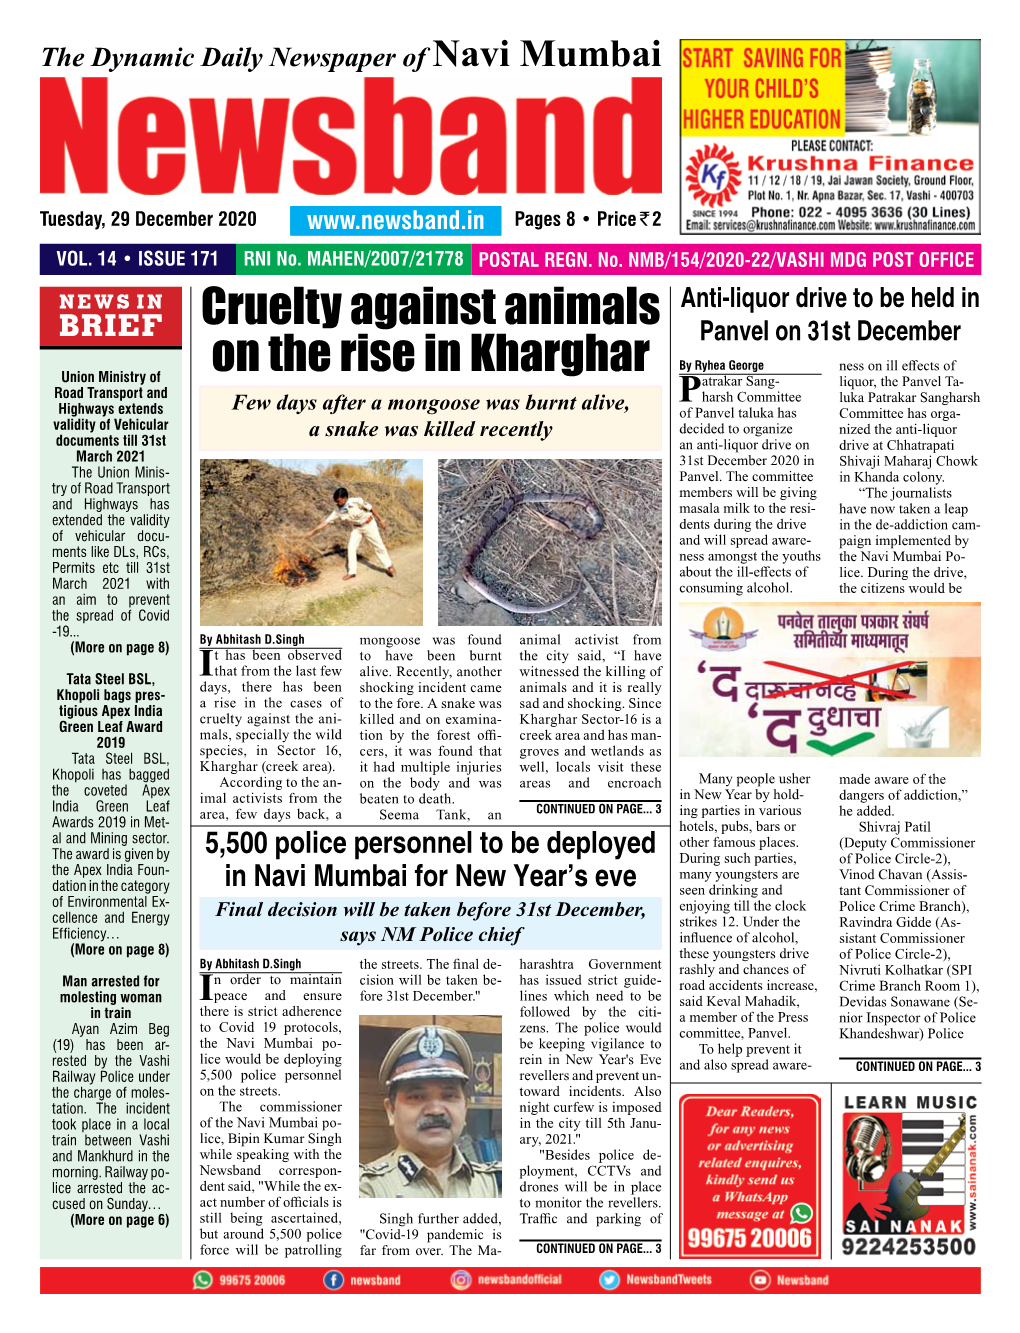 Cruelty Against Animals on the Rise in Kharghar